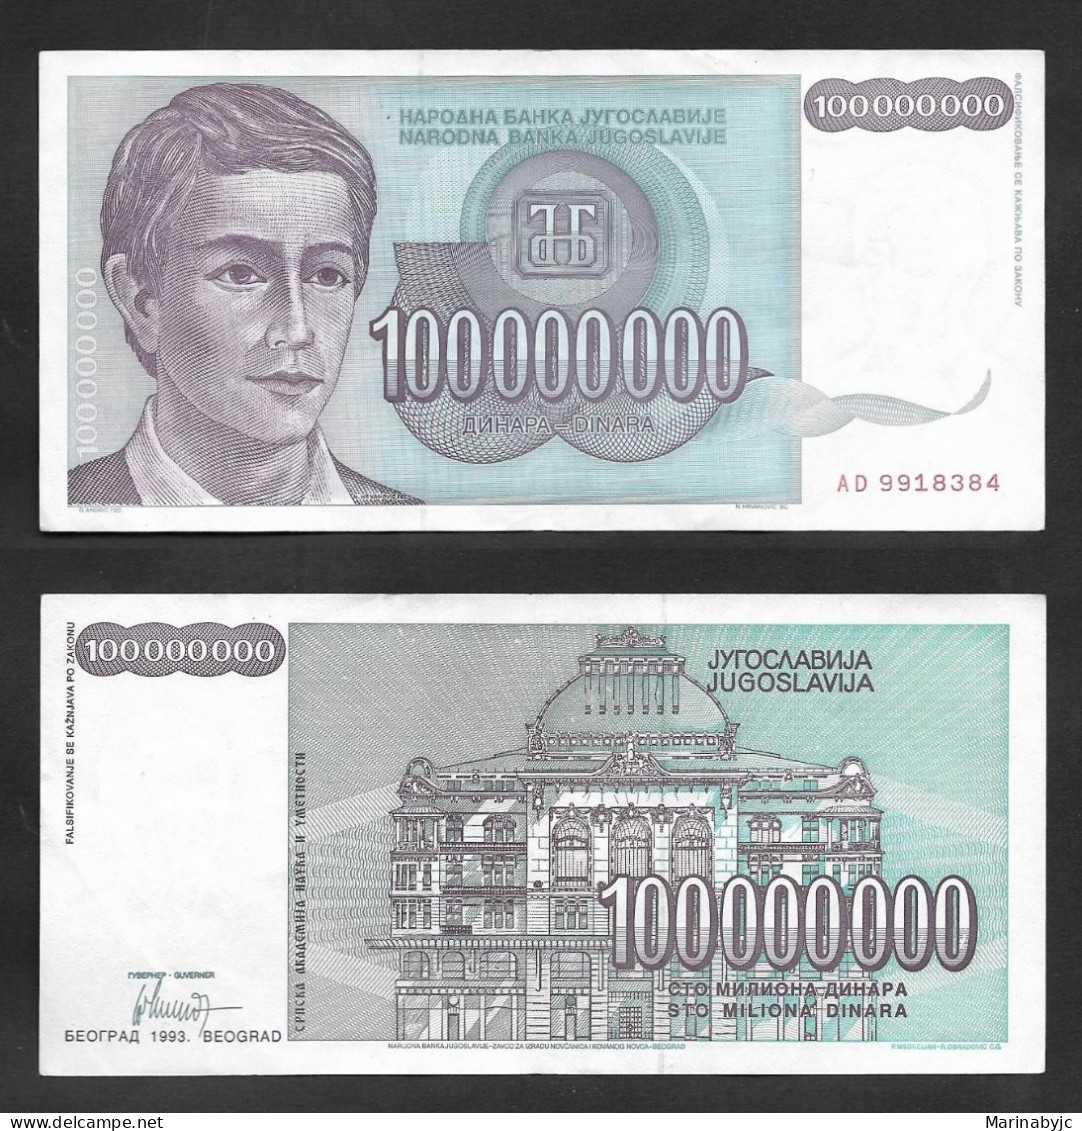 SE)1992 YUGOSLAVIA, BANKNOTE OF 100,000,000 DINARS OF THE CENTRAL BANK OF YUGOSLAVIA, WITH REVERSE, VF - Used Stamps